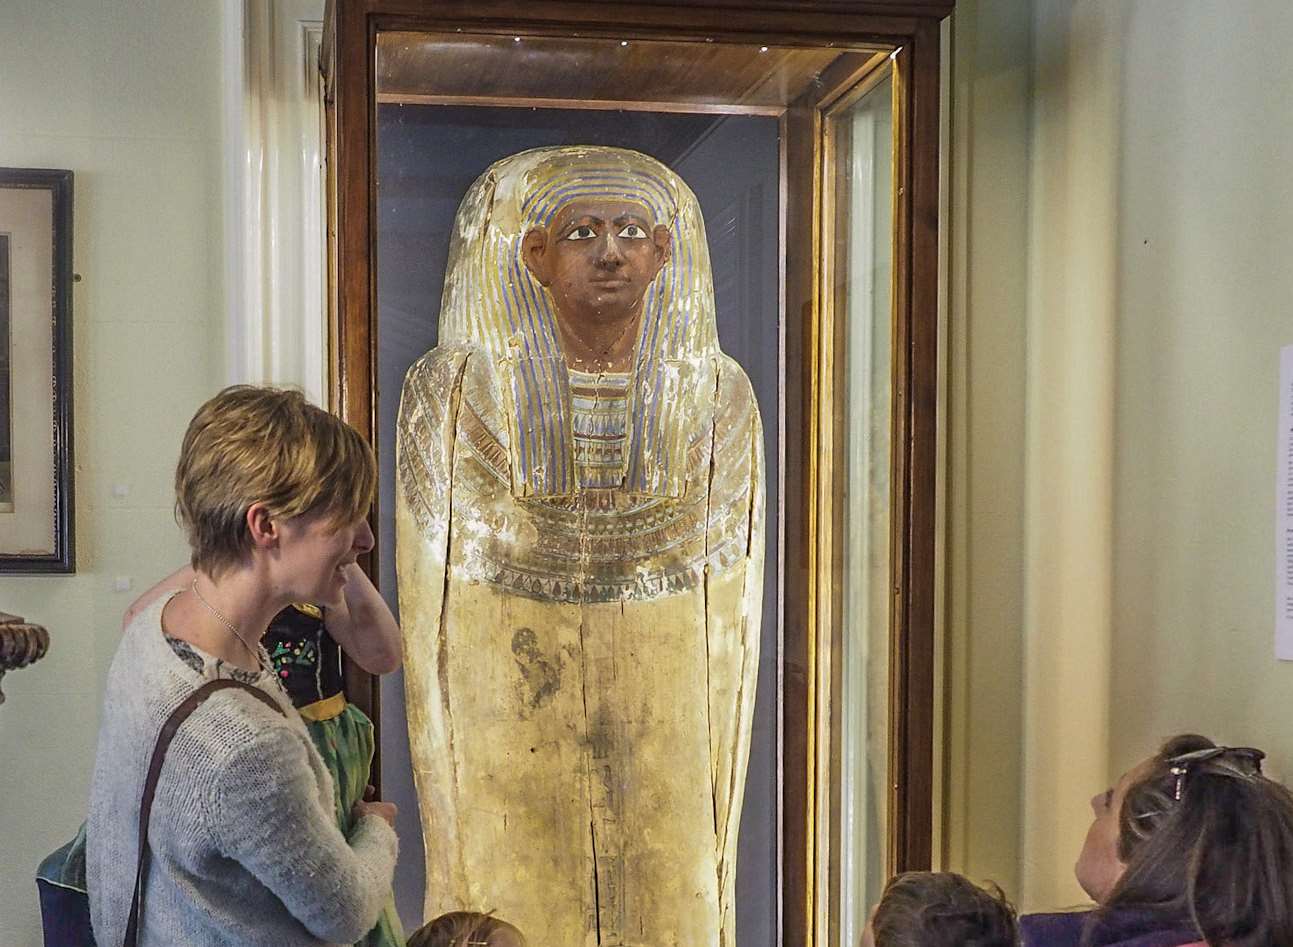 The Egyptian coffin lid on display at Chiddingstone Castle